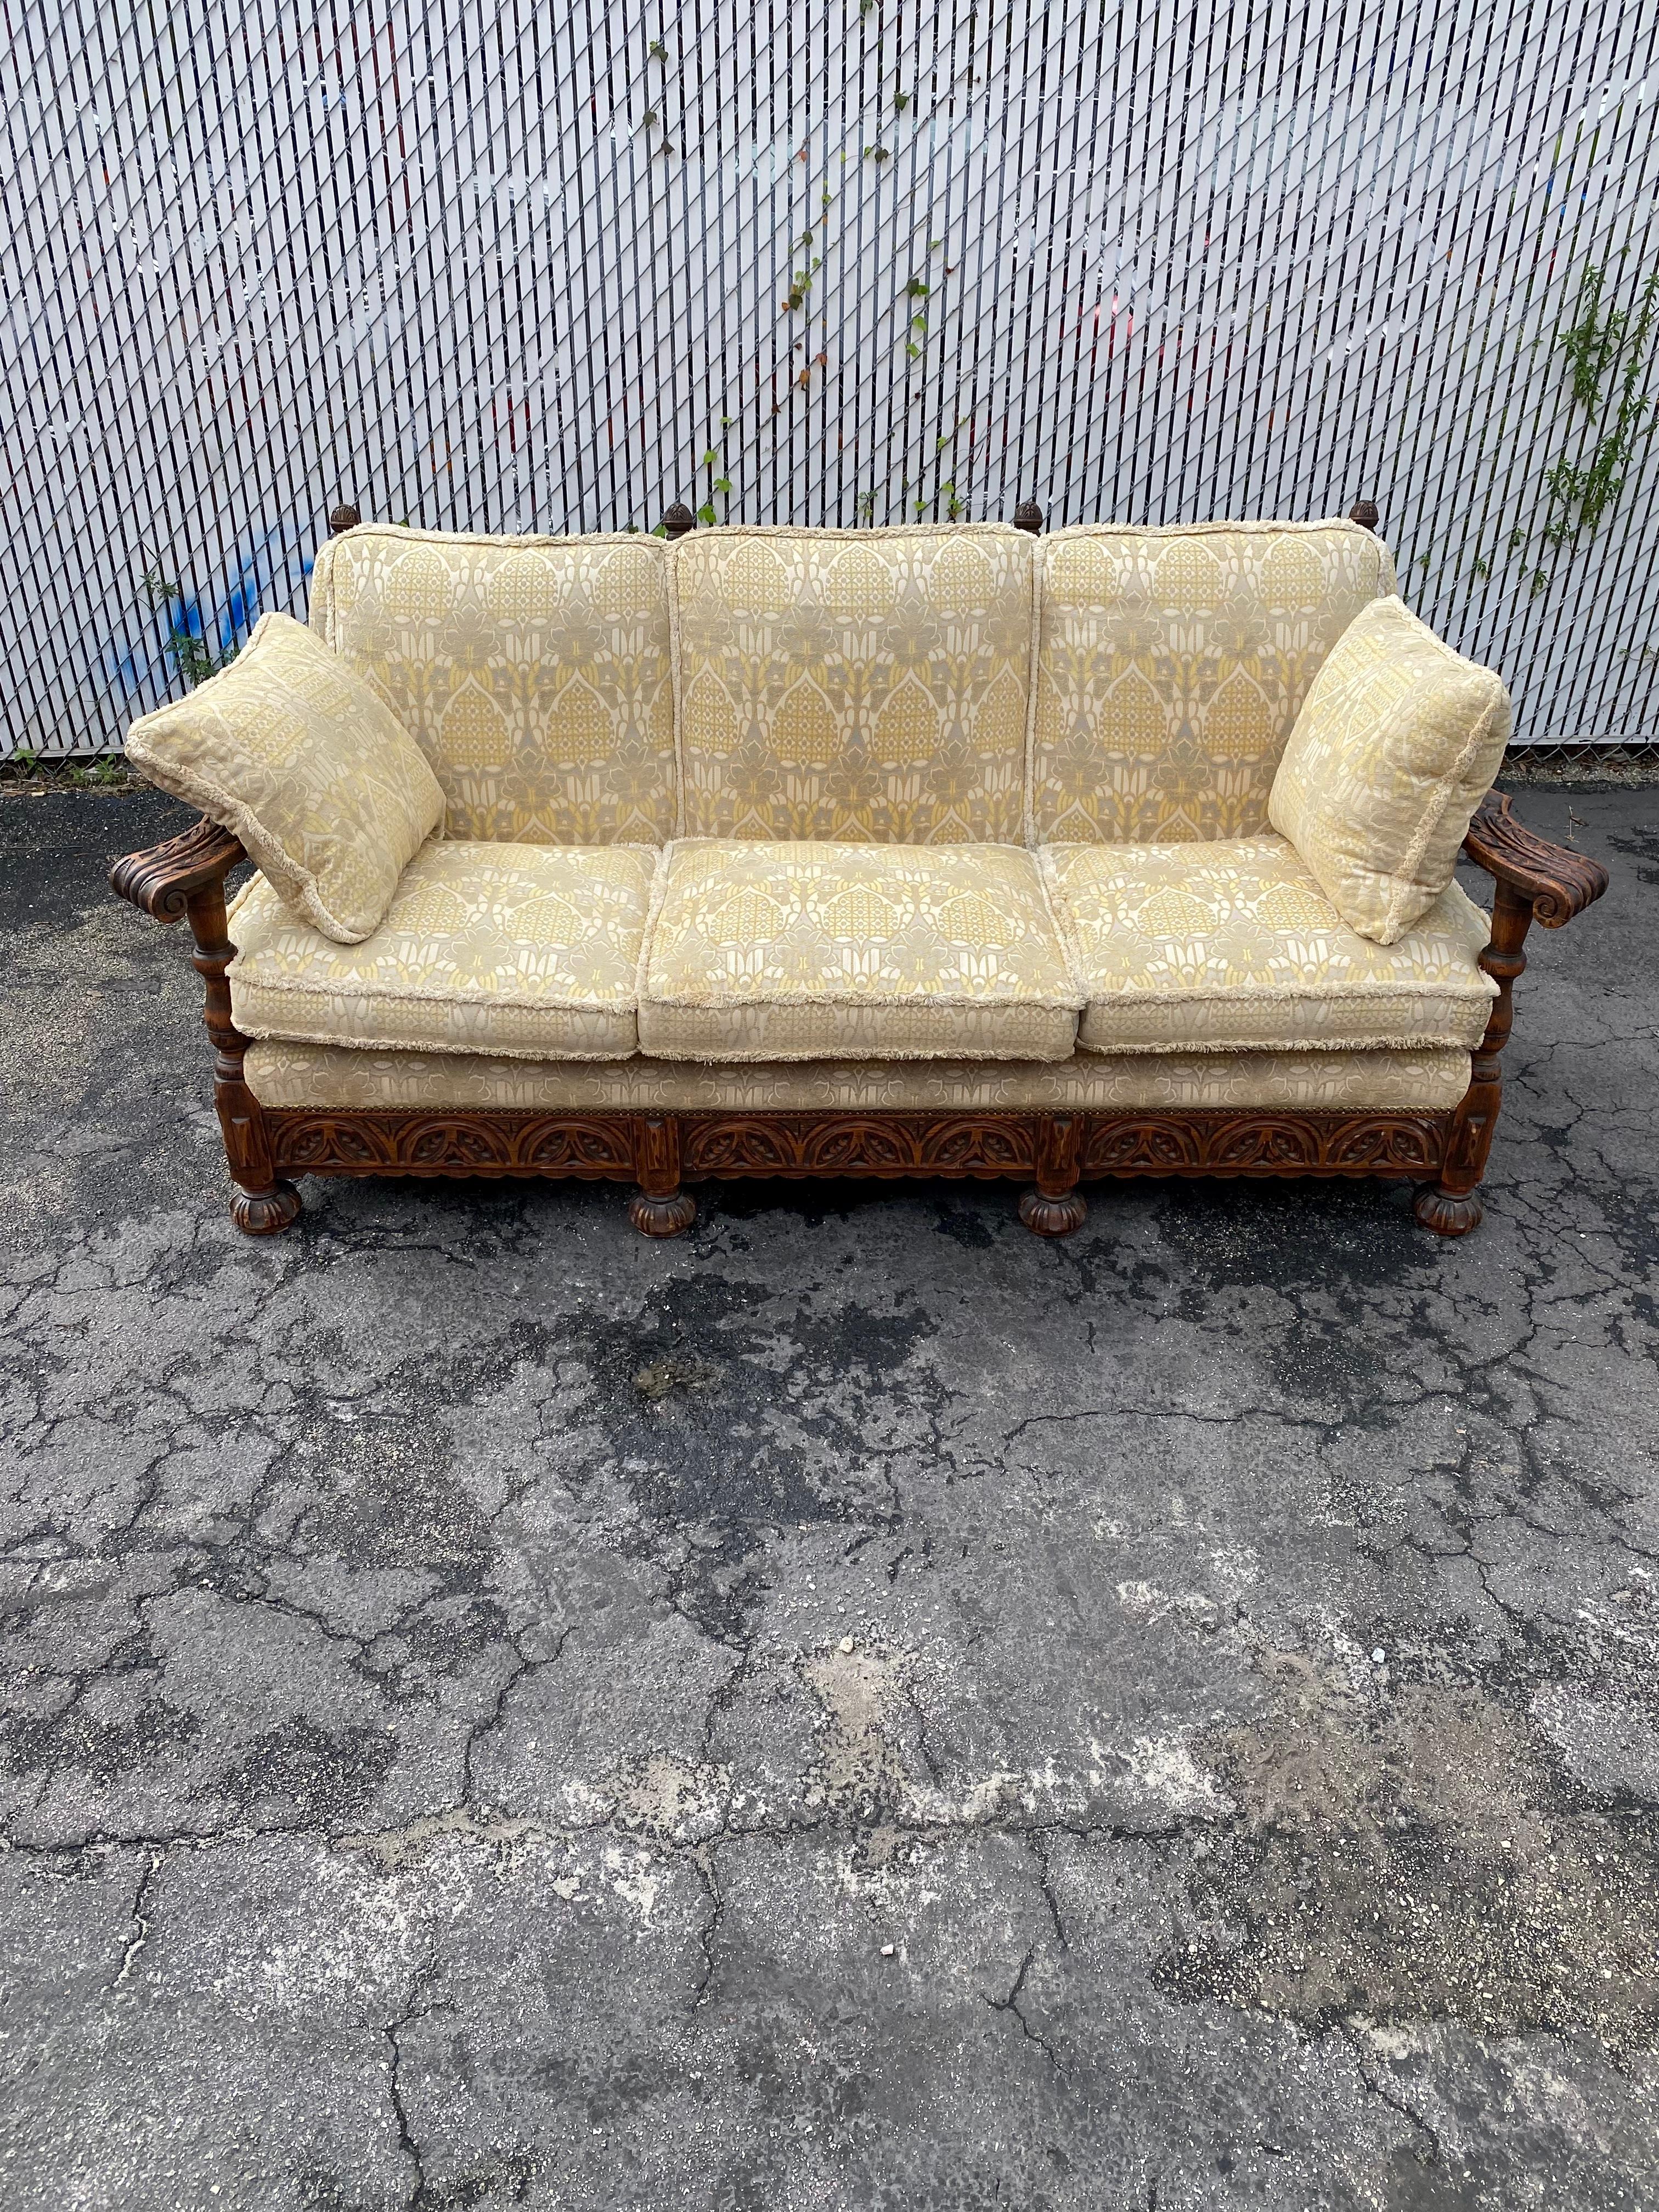 On offer on this occasion is one of the most stunning sofa you could hope to find. This is an ultra-rare opportunity to acquire what is, unequivocally, the best of the best, it being a most spectacular and beautifully-presented sectional.